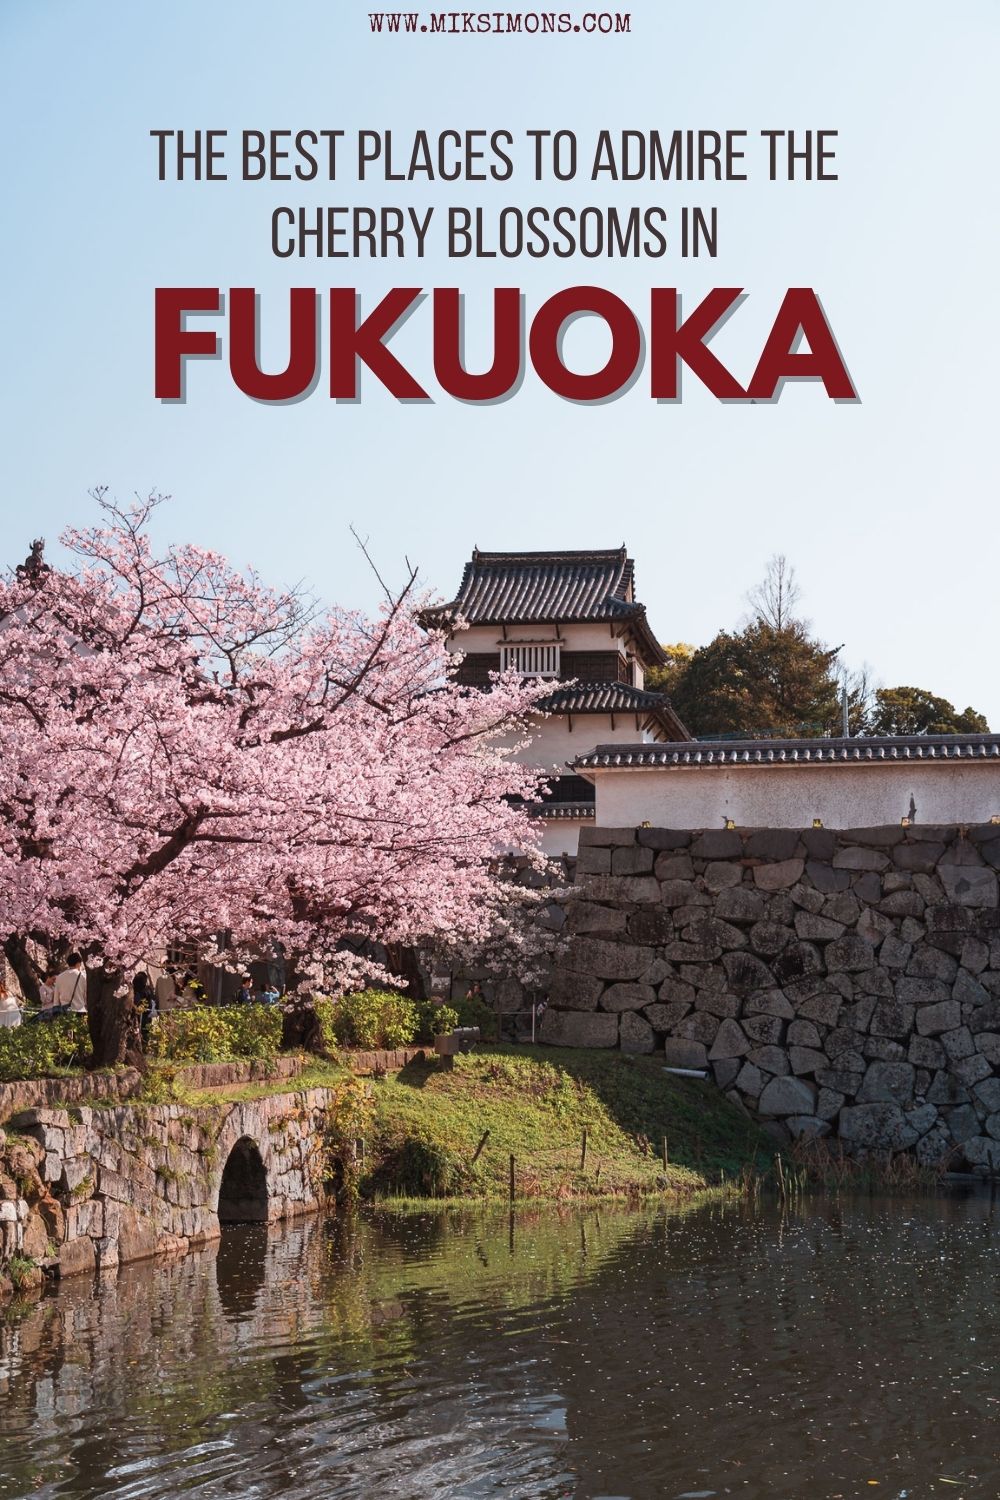 9 x the best places to see cherry blossoms in Fukuoka2